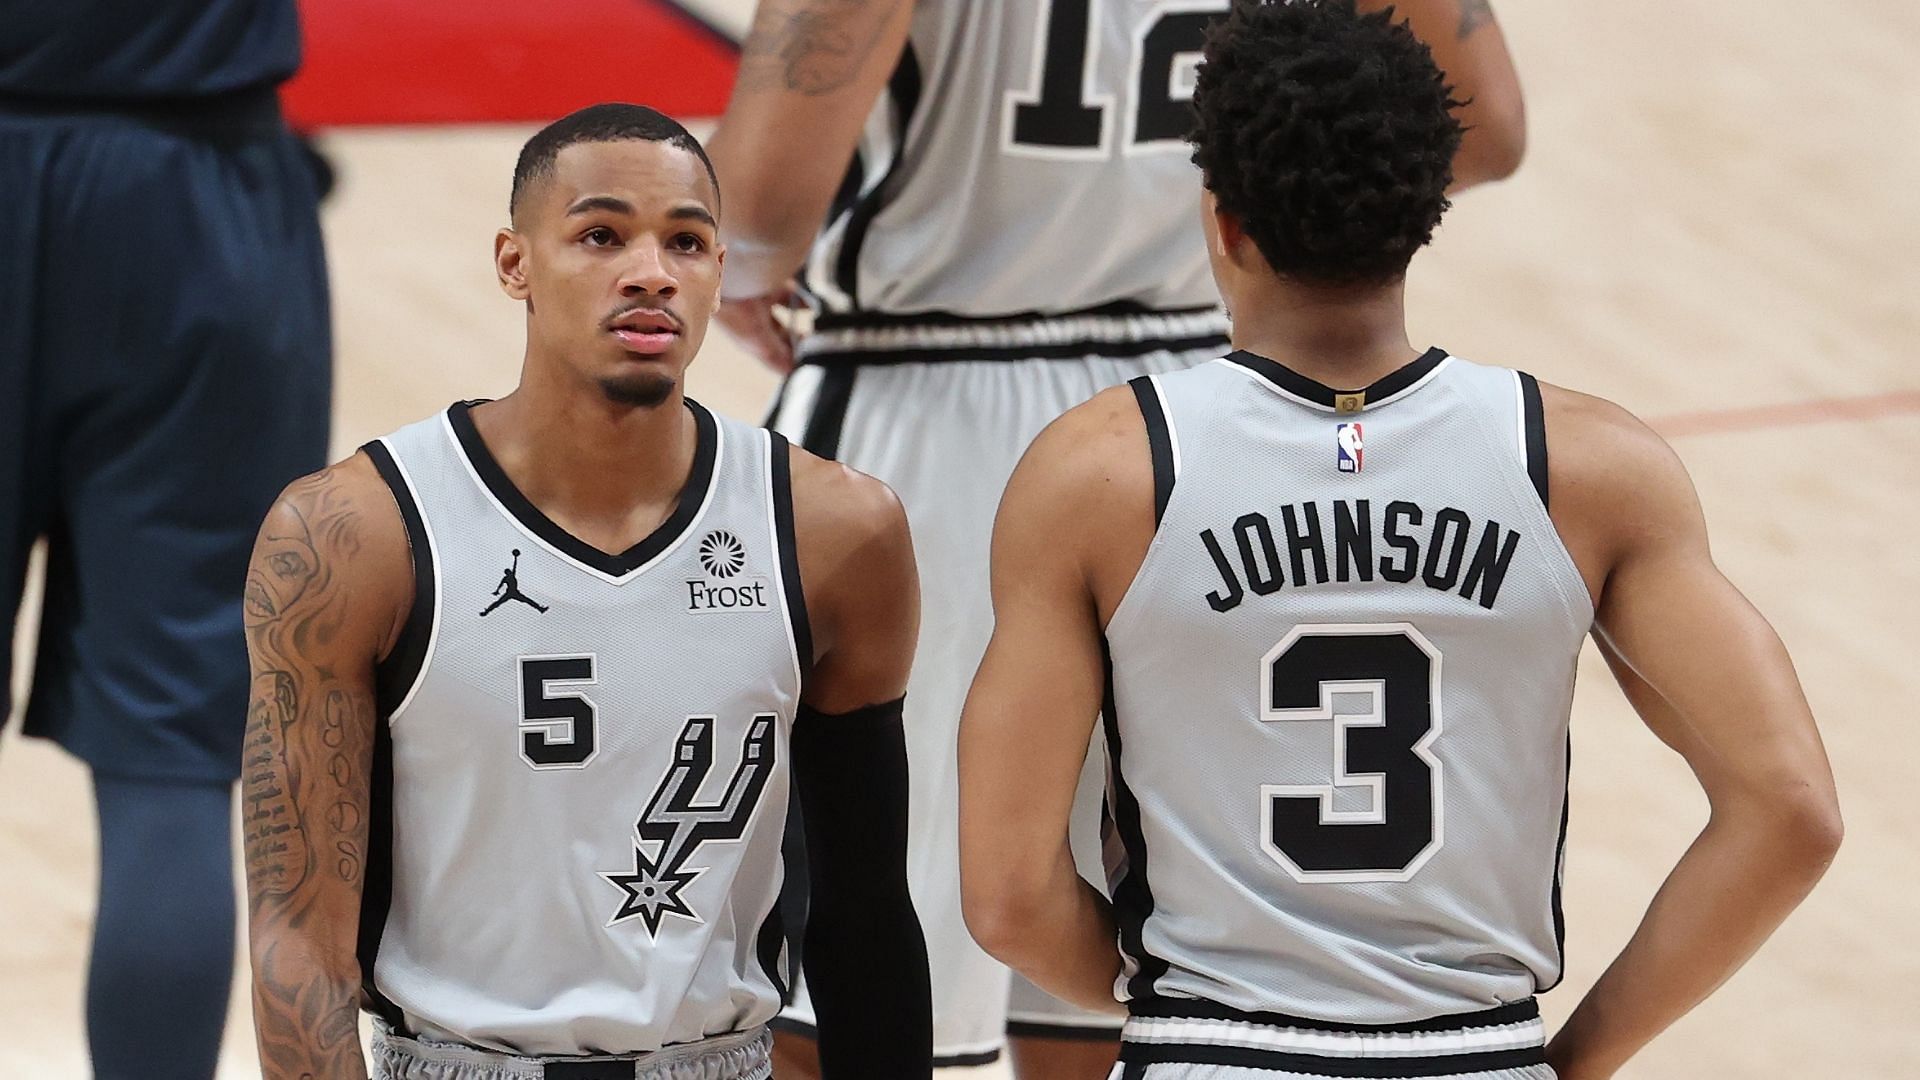 The San Antonio Spurs lead the NBA in assists per game. [Photo: Sporting News]